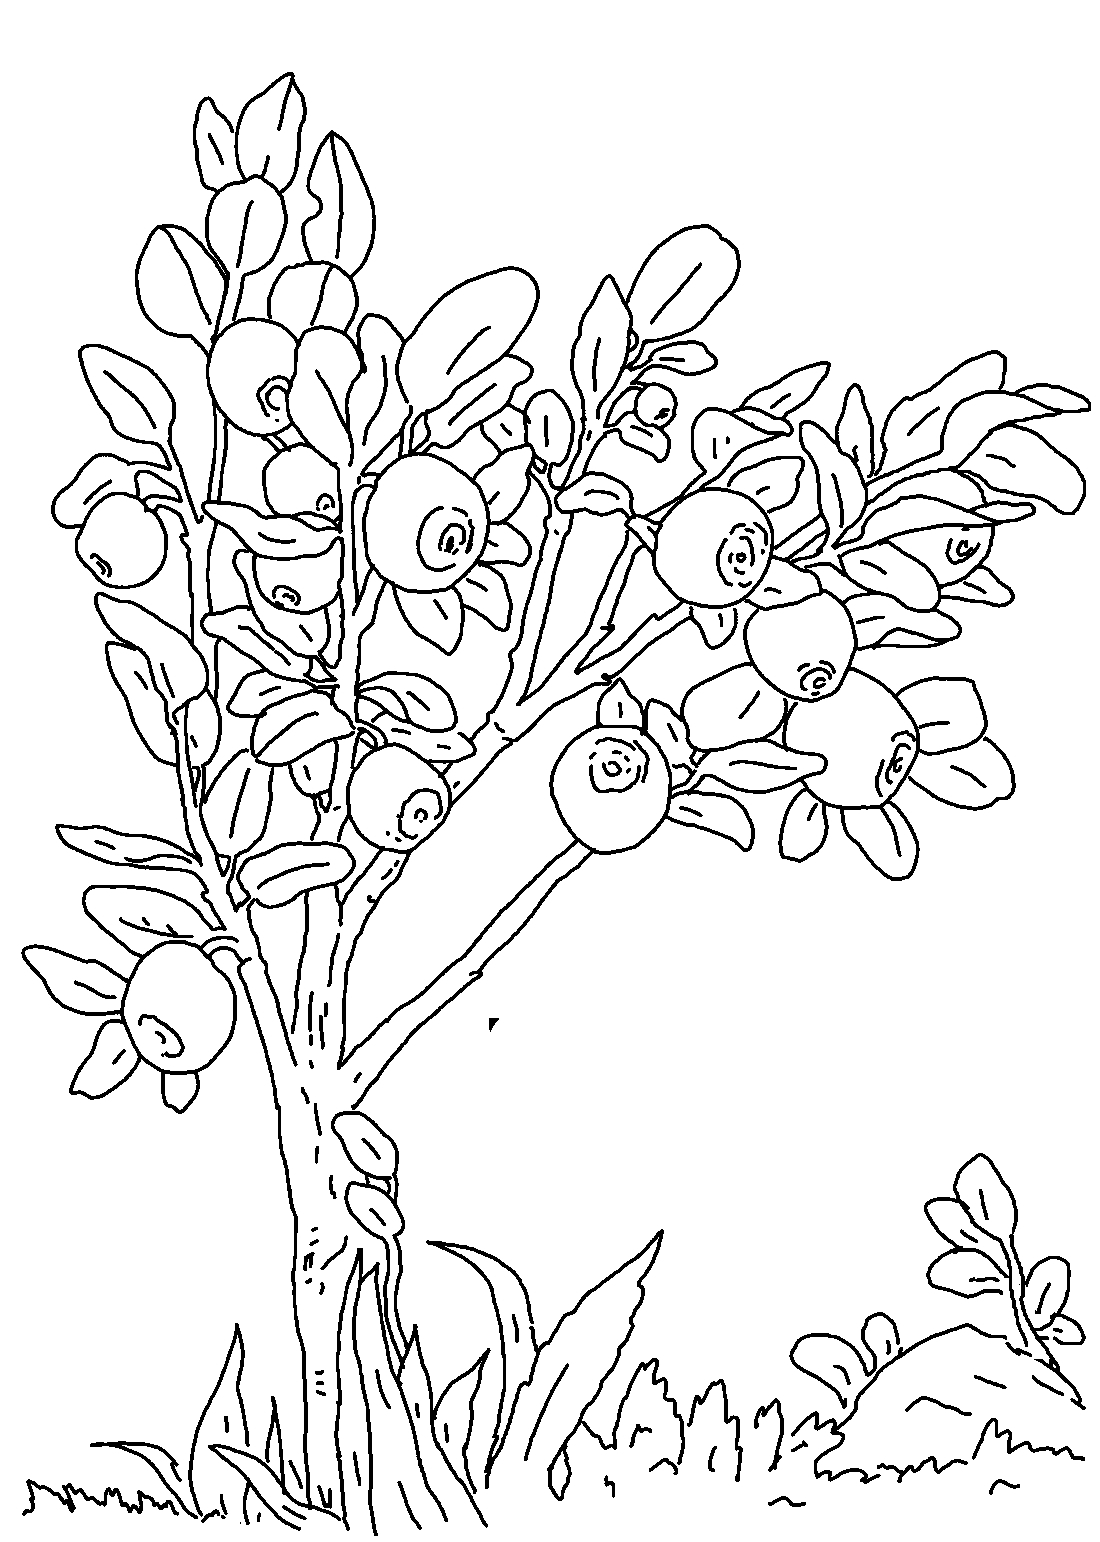 Blueberries coloring pages to download and print for free